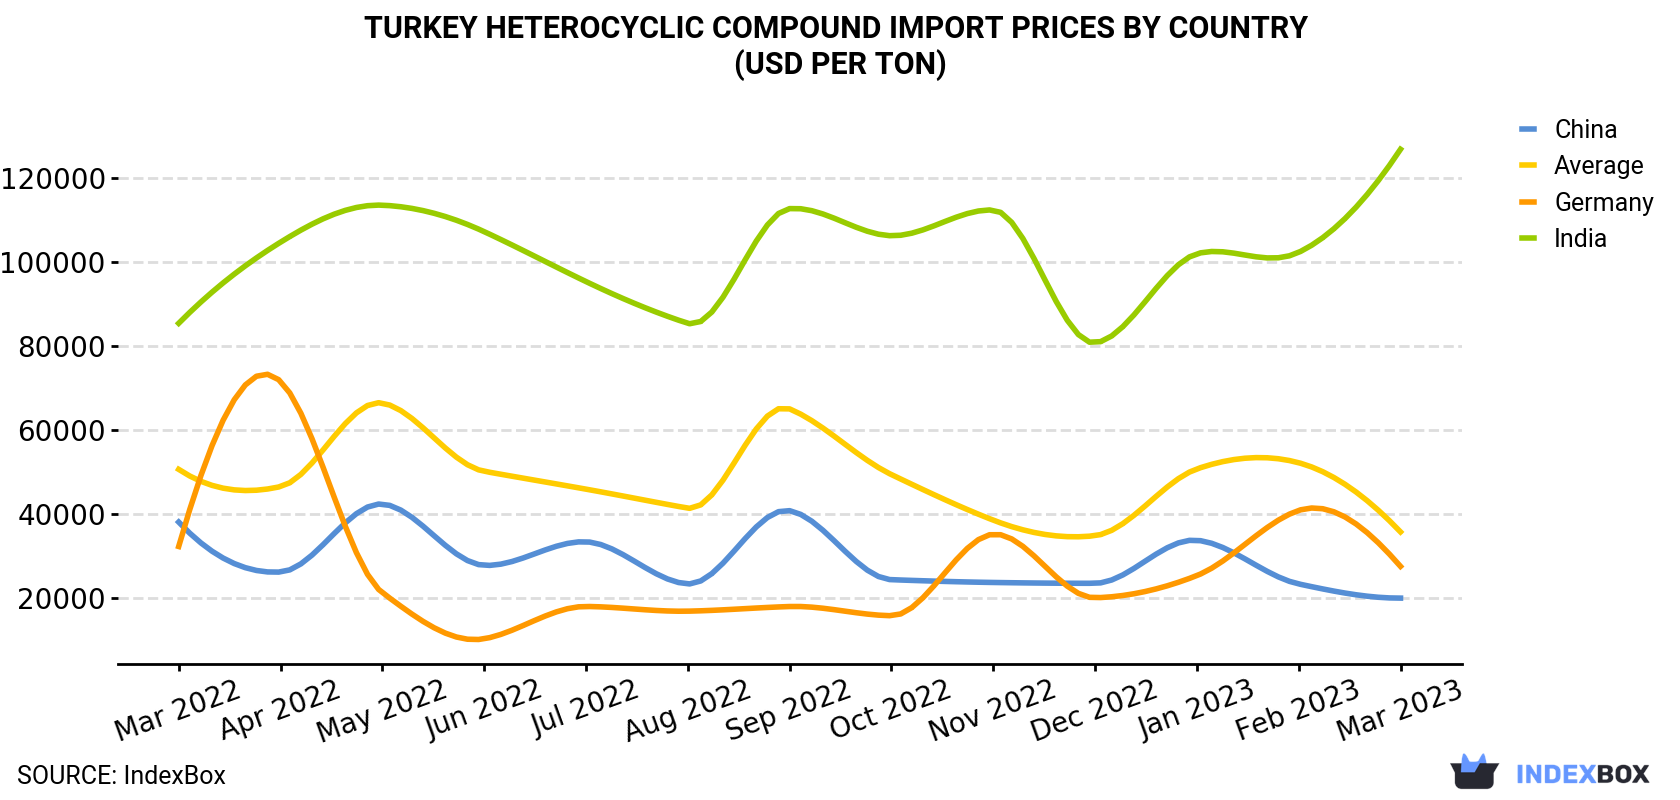 Turkey Heterocyclic Compound Import Prices By Country (USD Per Ton)